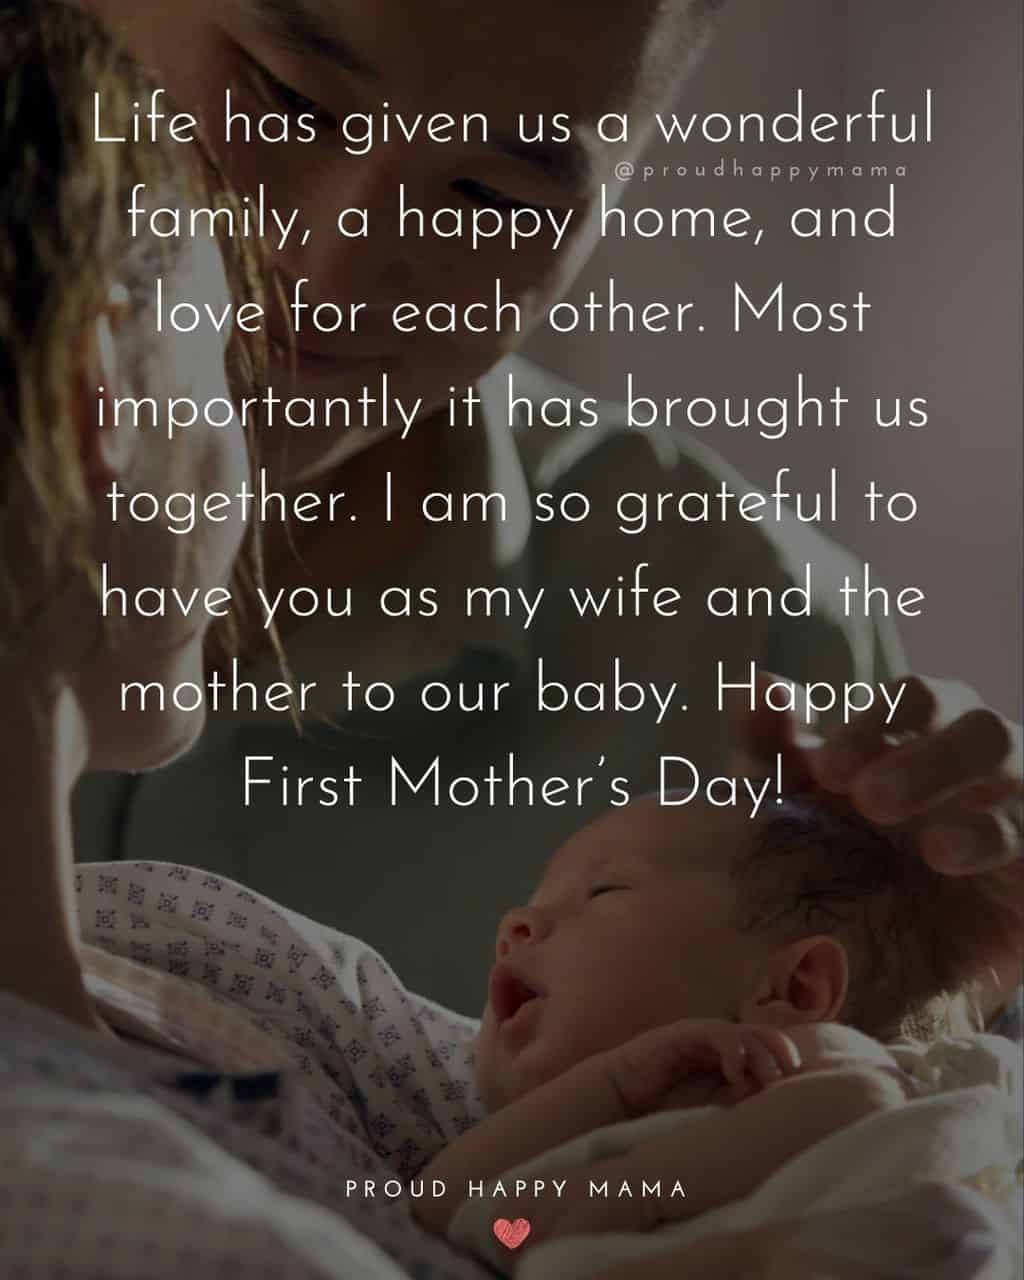 First Mothers Day Quotes - Life has given us a wonderful family, a happy home, and love for each other. Most importantly it has brought us together. I am so grateful to have you as my wife and